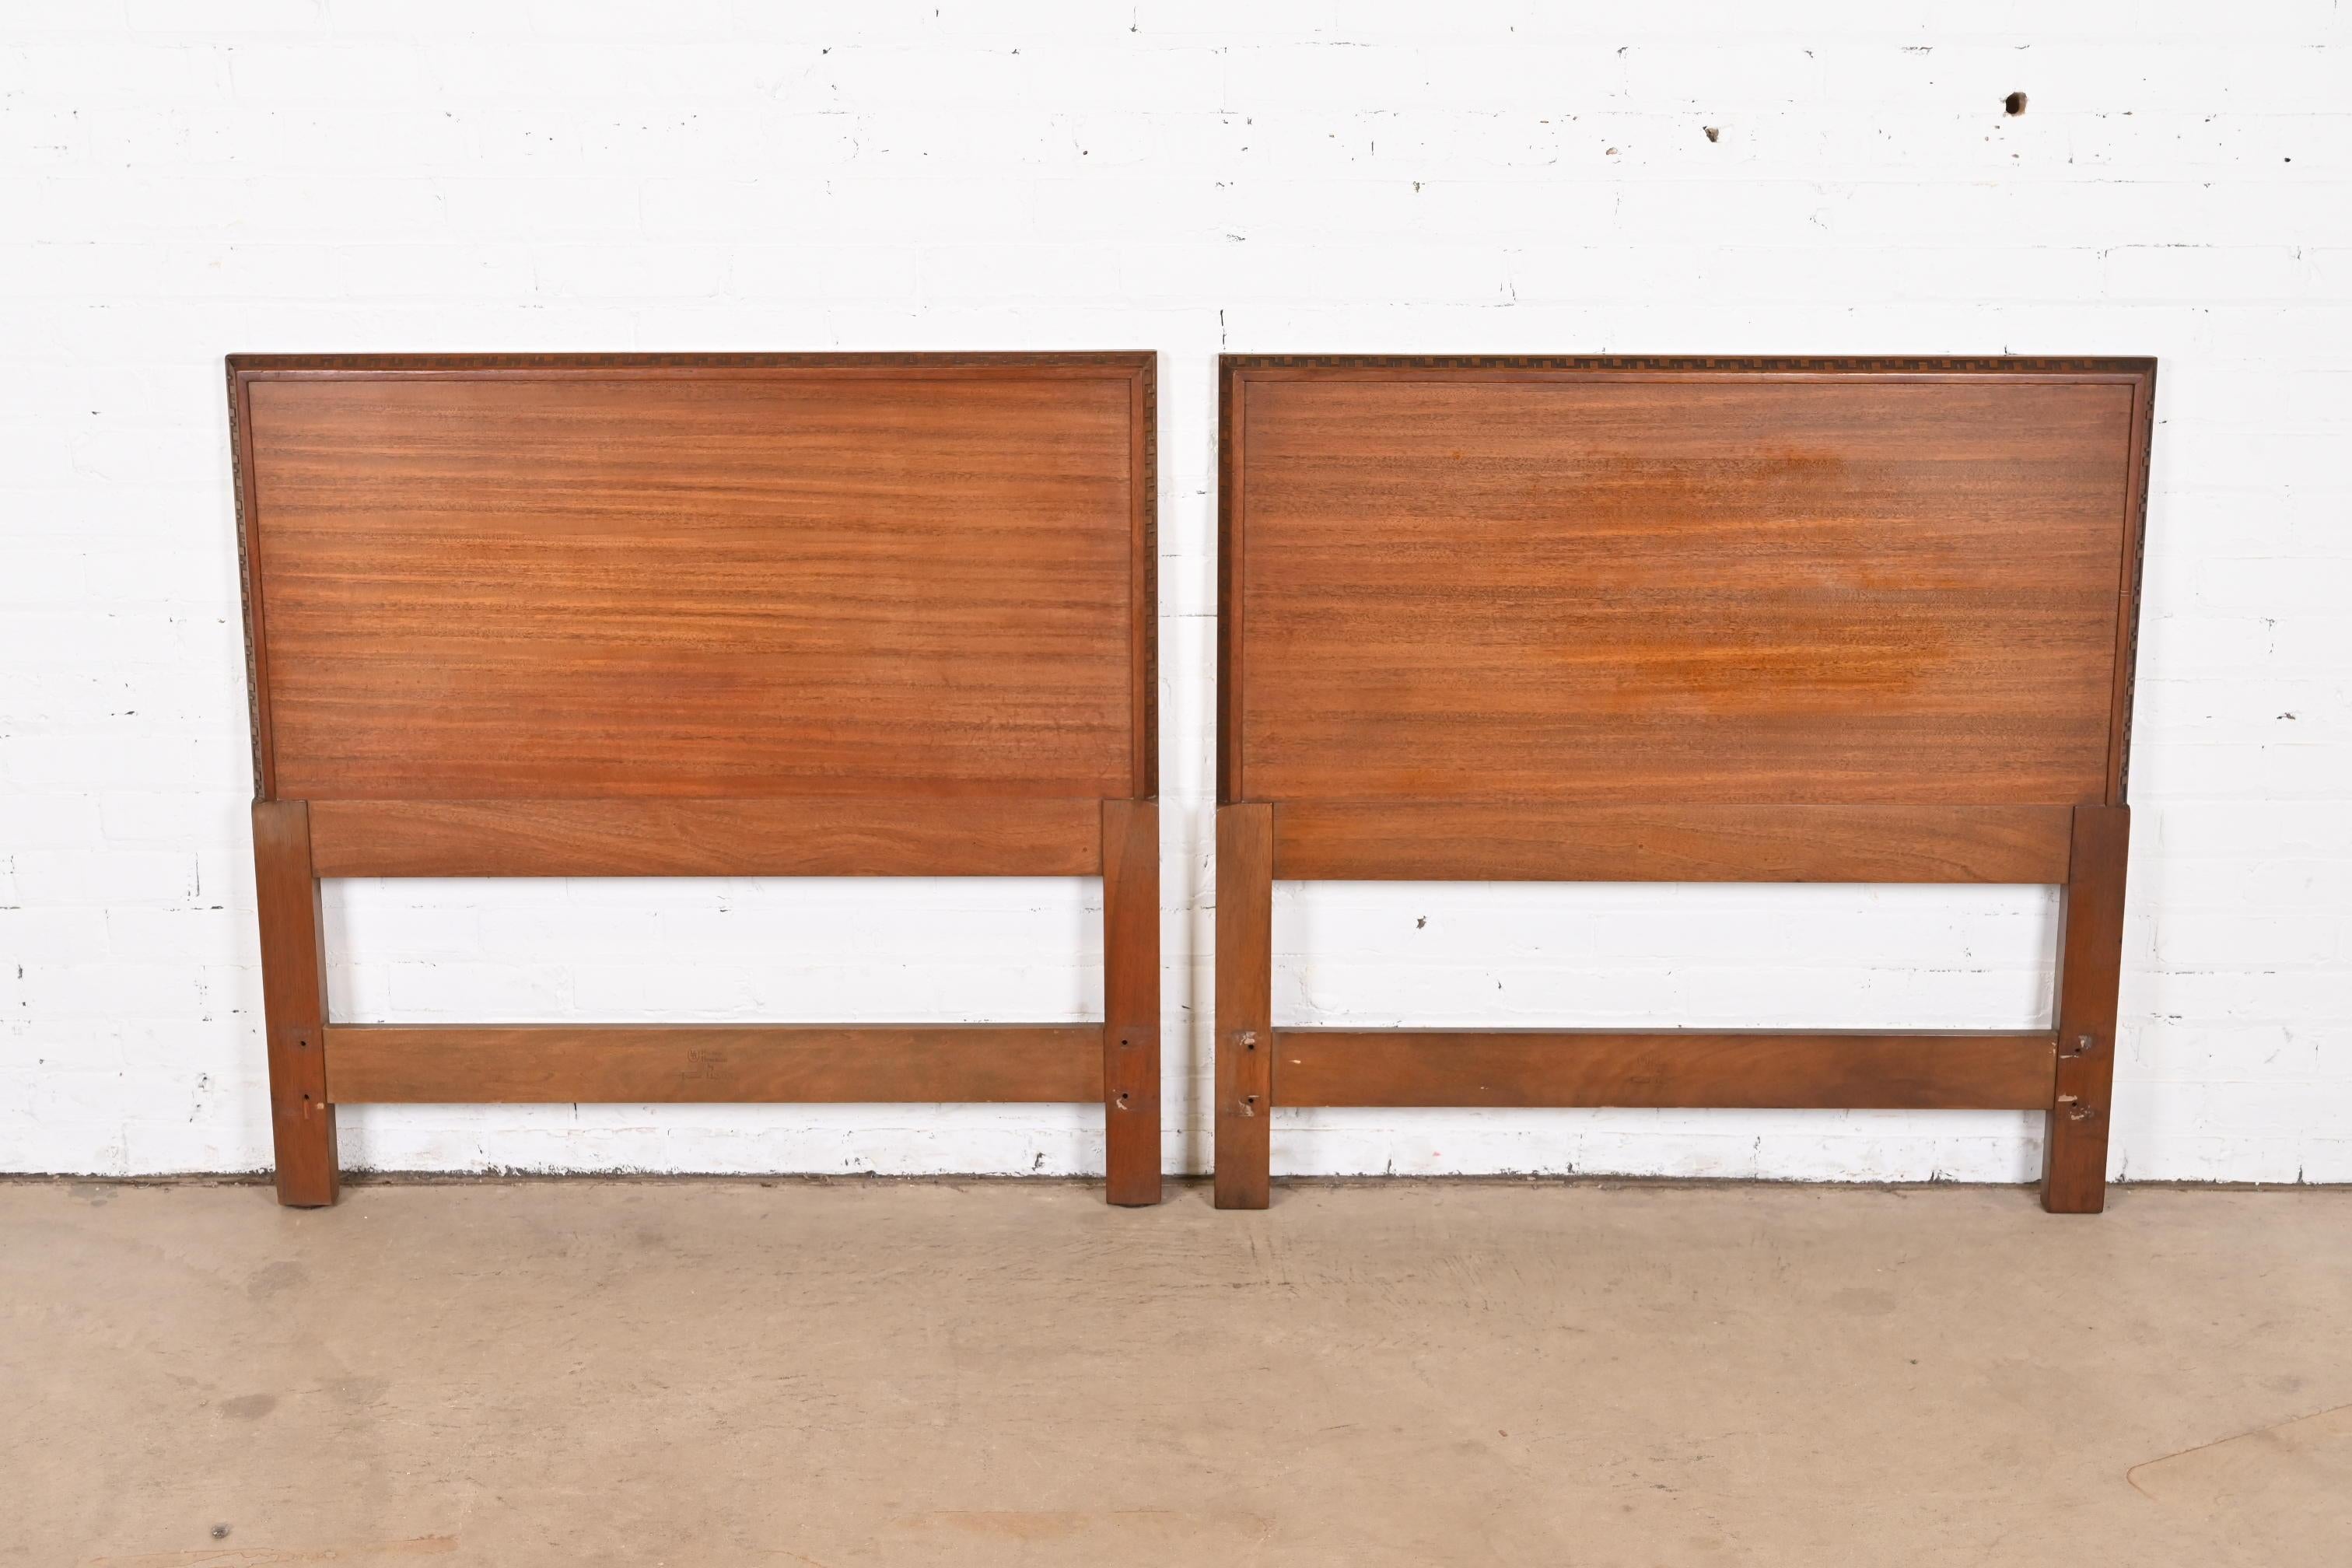 A rare and stunning pair of Mid-Century Modern 